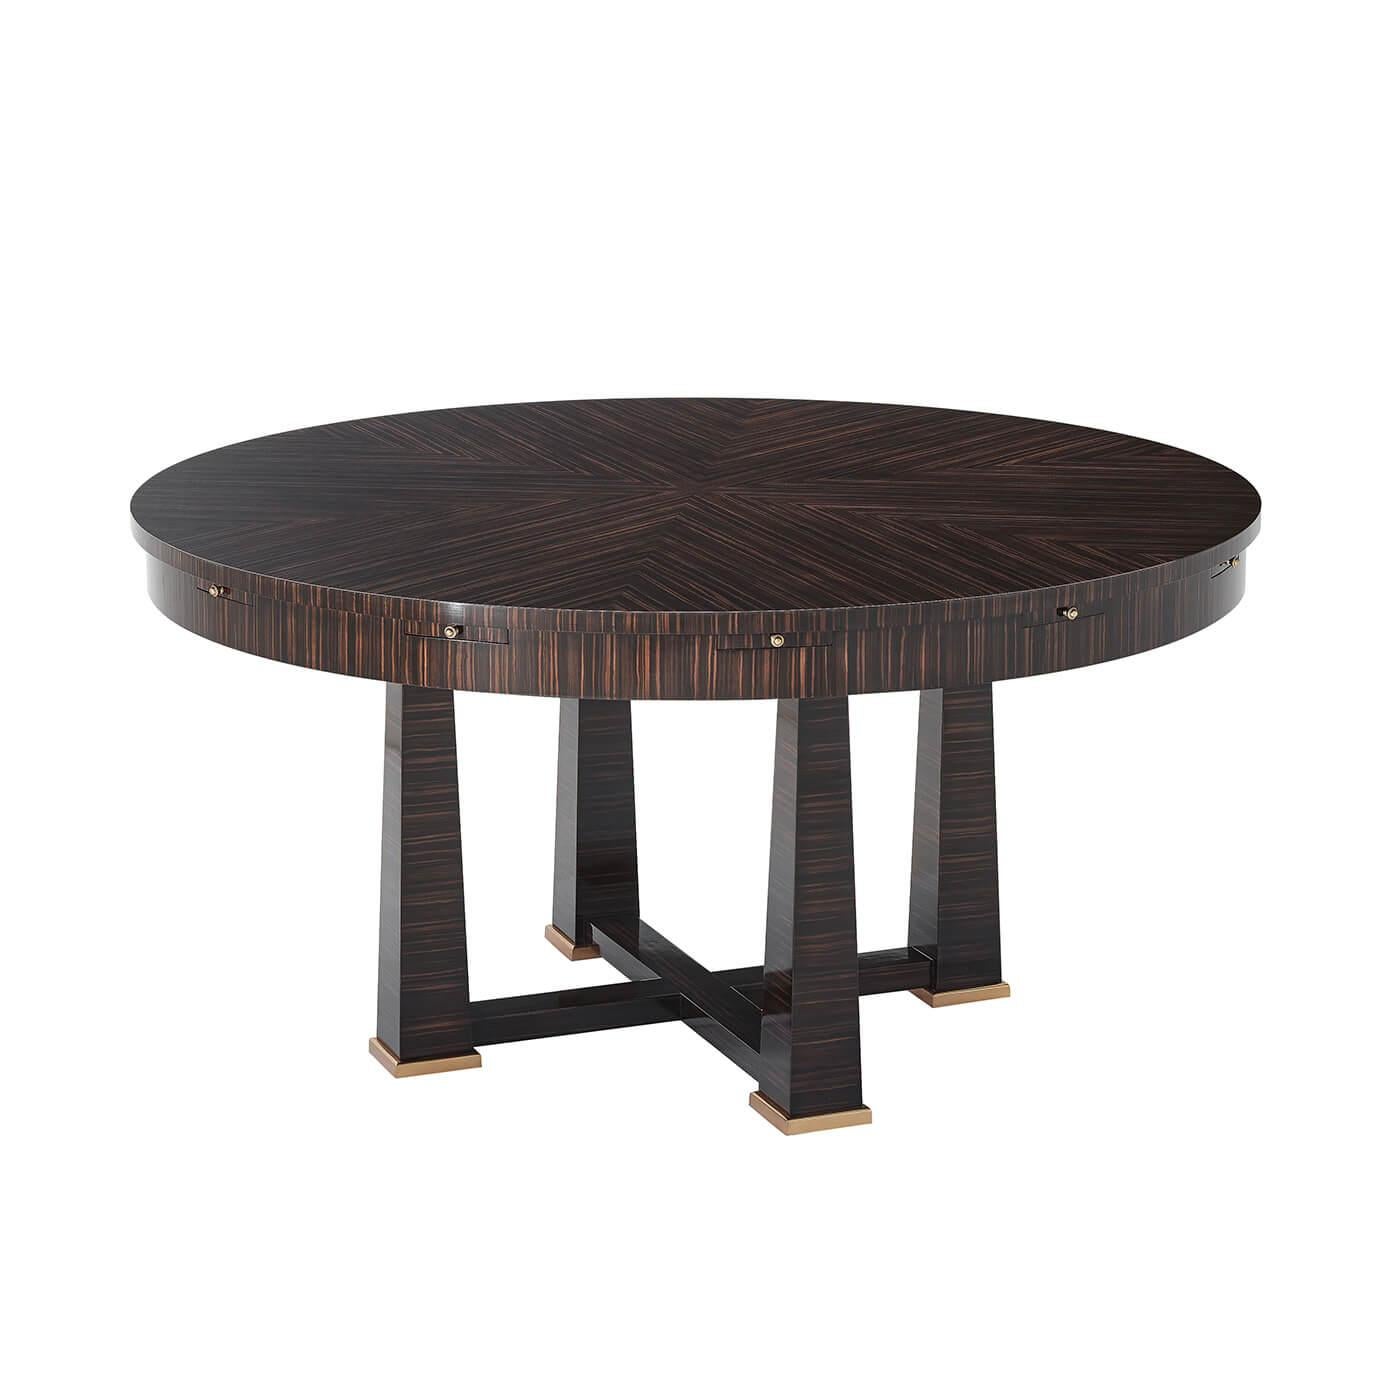 A European Art Deco inspired center table with striking sunburst Amara veneered top with Amara finish expanding with six radial leaves. The pedestal is a series of four square reversed tapered legs joined by an X-stretcher. Hampton brass finish